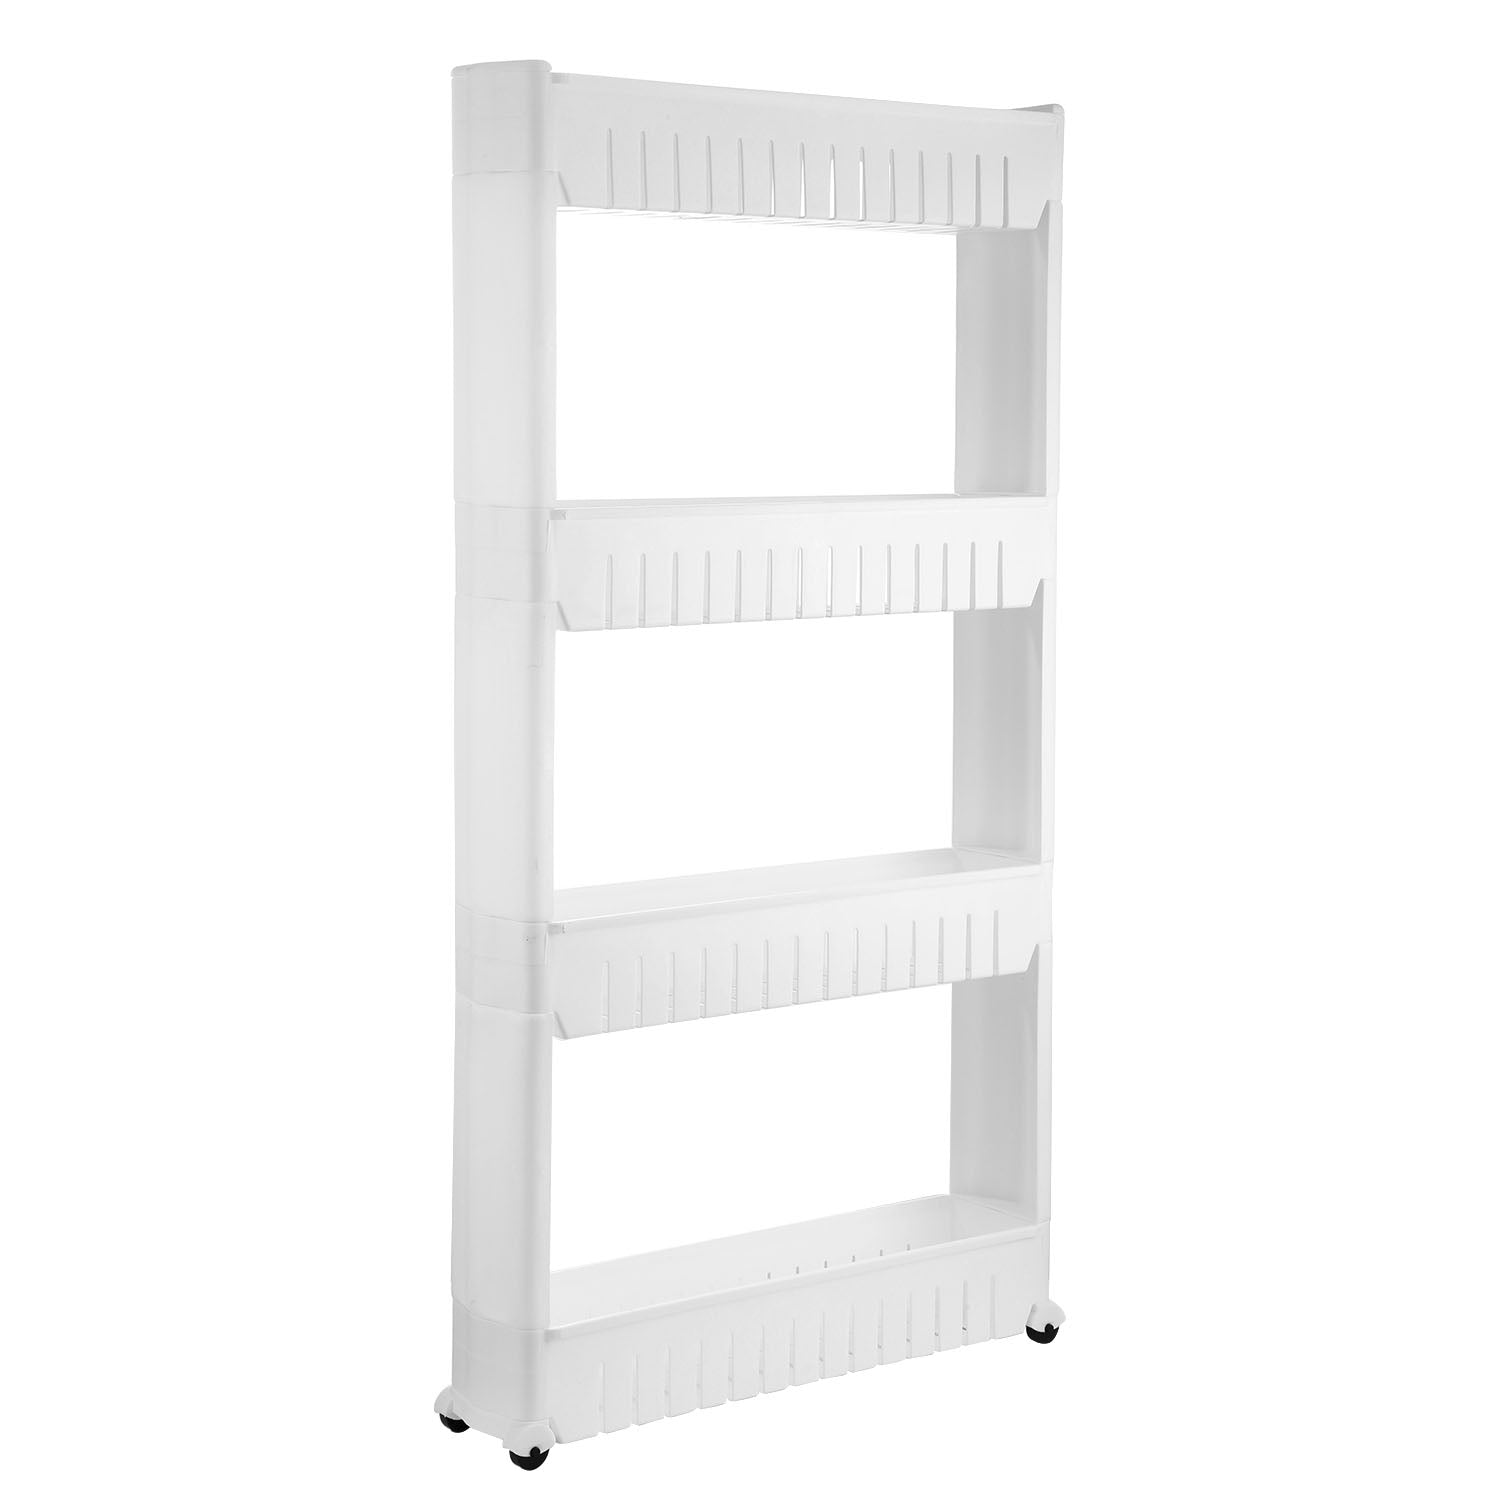 iMounTEK Slim Storage Cart Mobile Shelving Unit Organizer Slide Out Storage Rolling Utility Cart Tower Rack for Kitchen Bathroom Laundry Narrow Places，4 Tiers